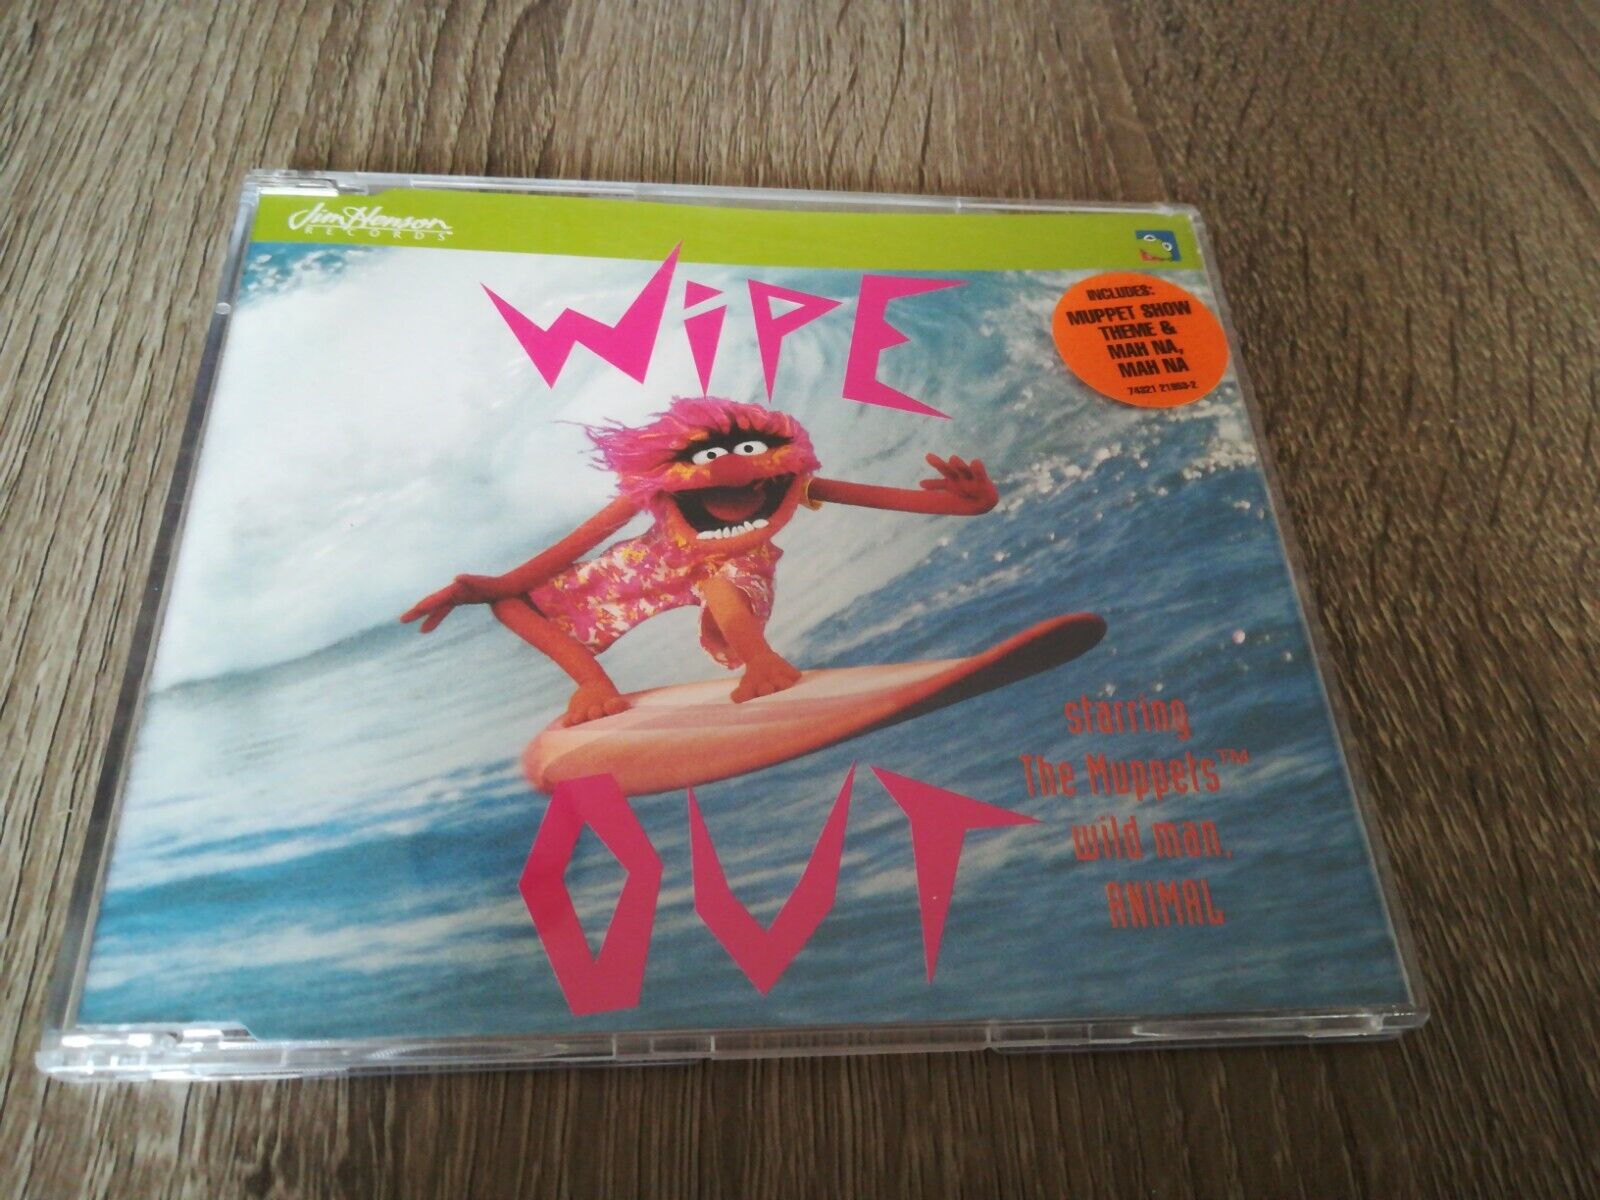 A CD Single Jim Henson Records  Wipe Out   Starring The Muppets Animal